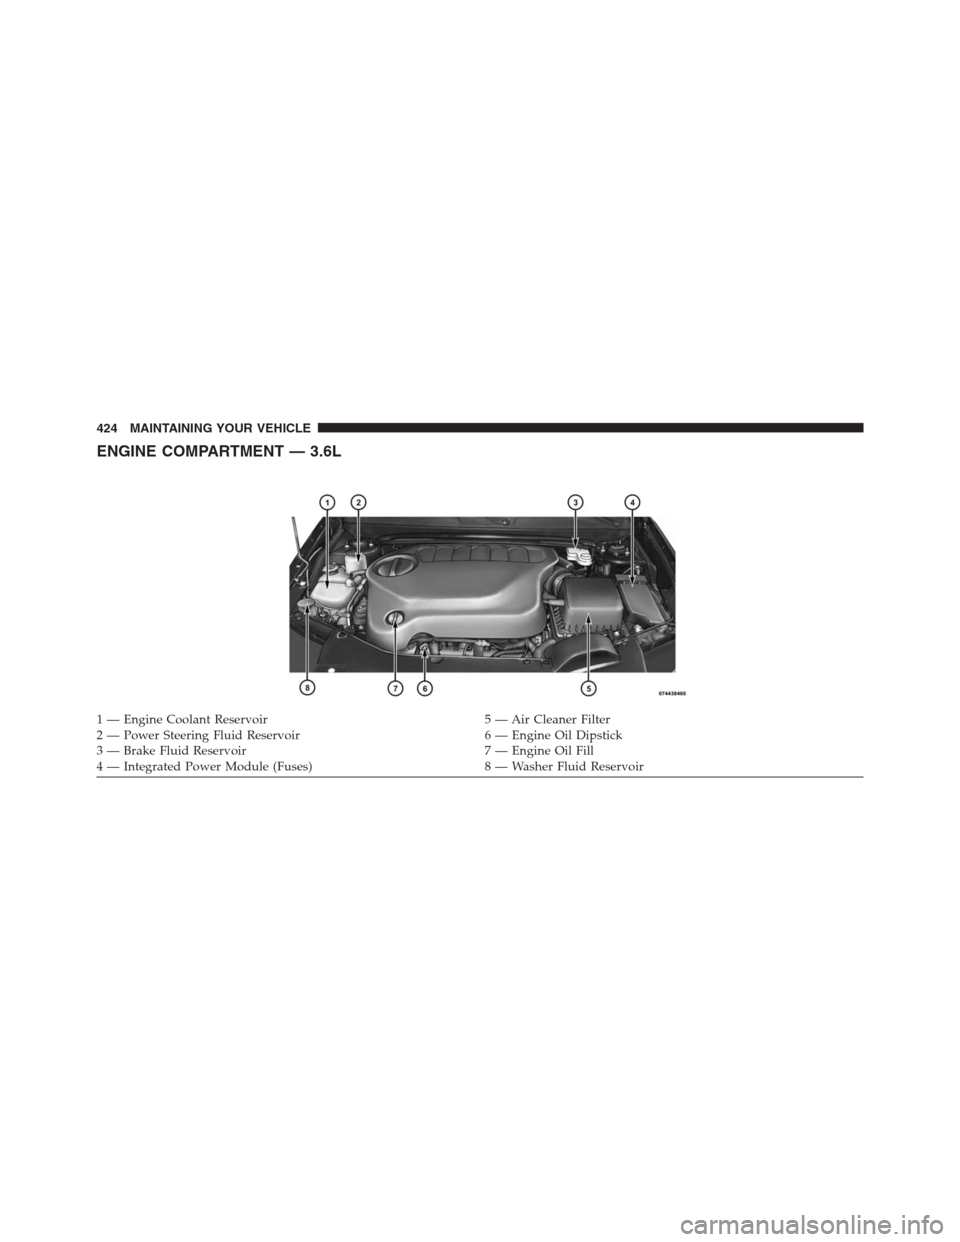 CHRYSLER 200 CONVERTIBLE 2013 1.G Owners Manual ENGINE COMPARTMENT — 3.6L
1 — Engine Coolant Reservoir 5 — Air Cleaner Filter
2 — Power Steering Fluid Reservoir 6 — Engine Oil Dipstick
3 — Brake Fluid Reservoir 7 — Engine Oil Fill
4 �